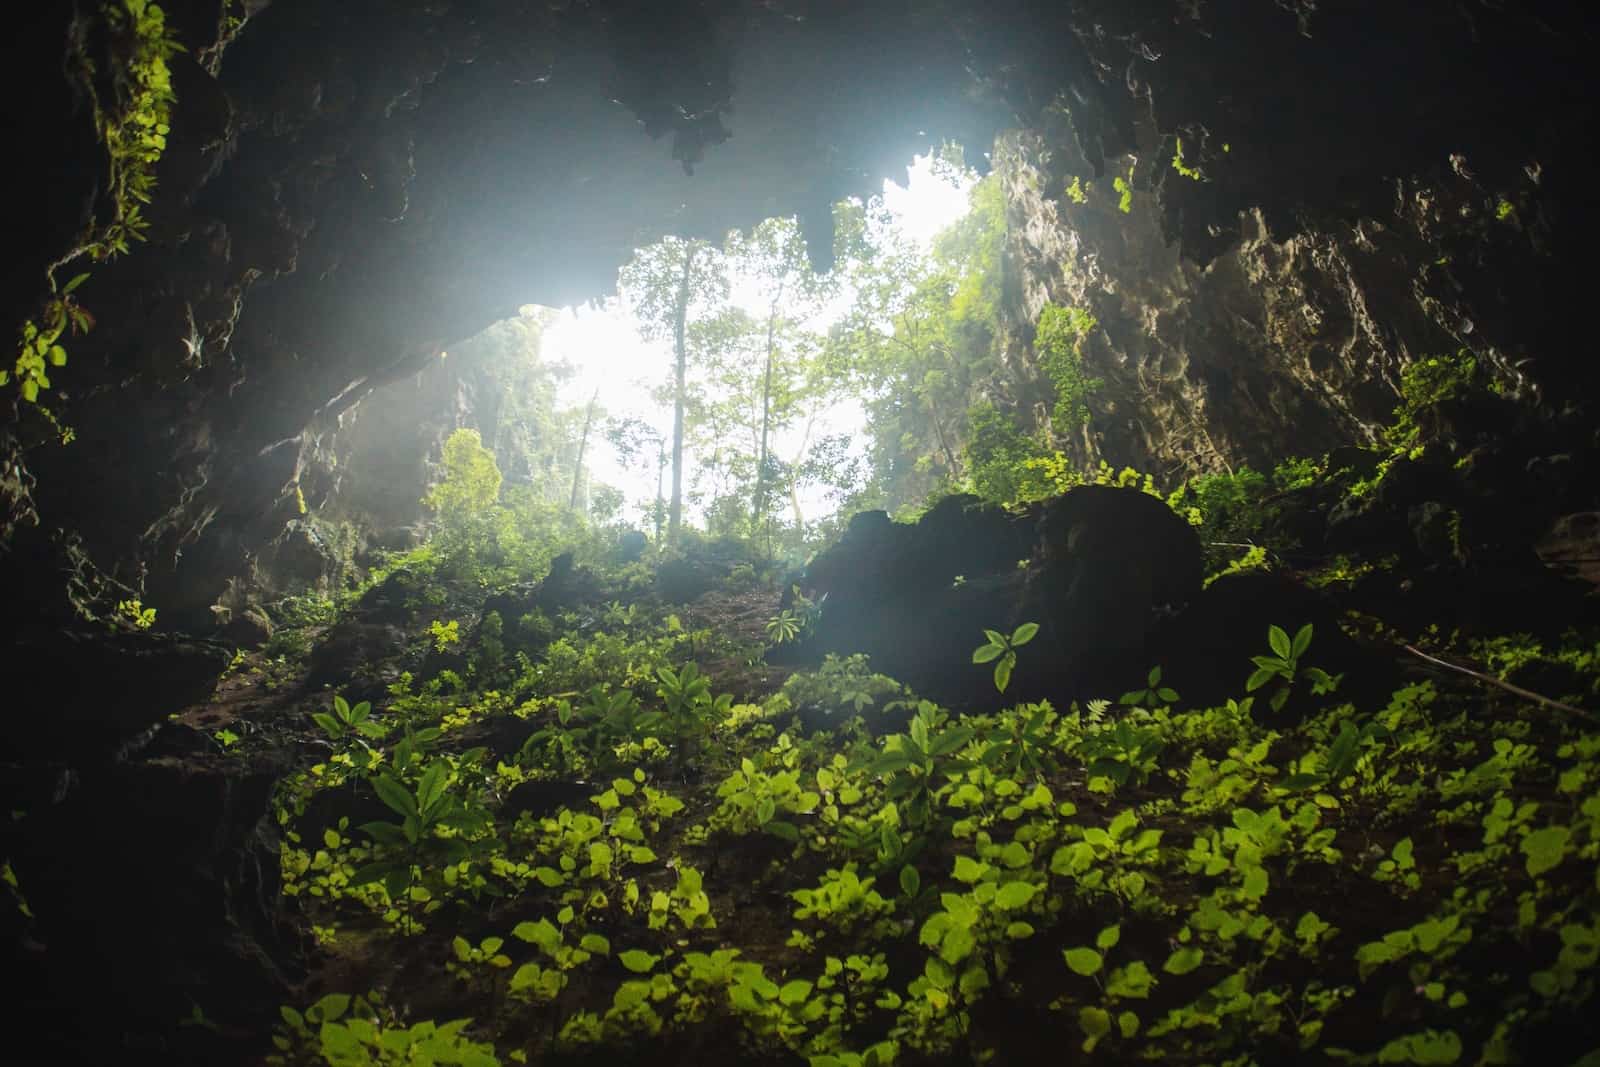 The mouth of the Tham Luang Nang Non cave in the Chiang Rai Province of Thailand, the site of the Thailand cave rescue; there is rock covered in foliage and trees outside the cave mouth.